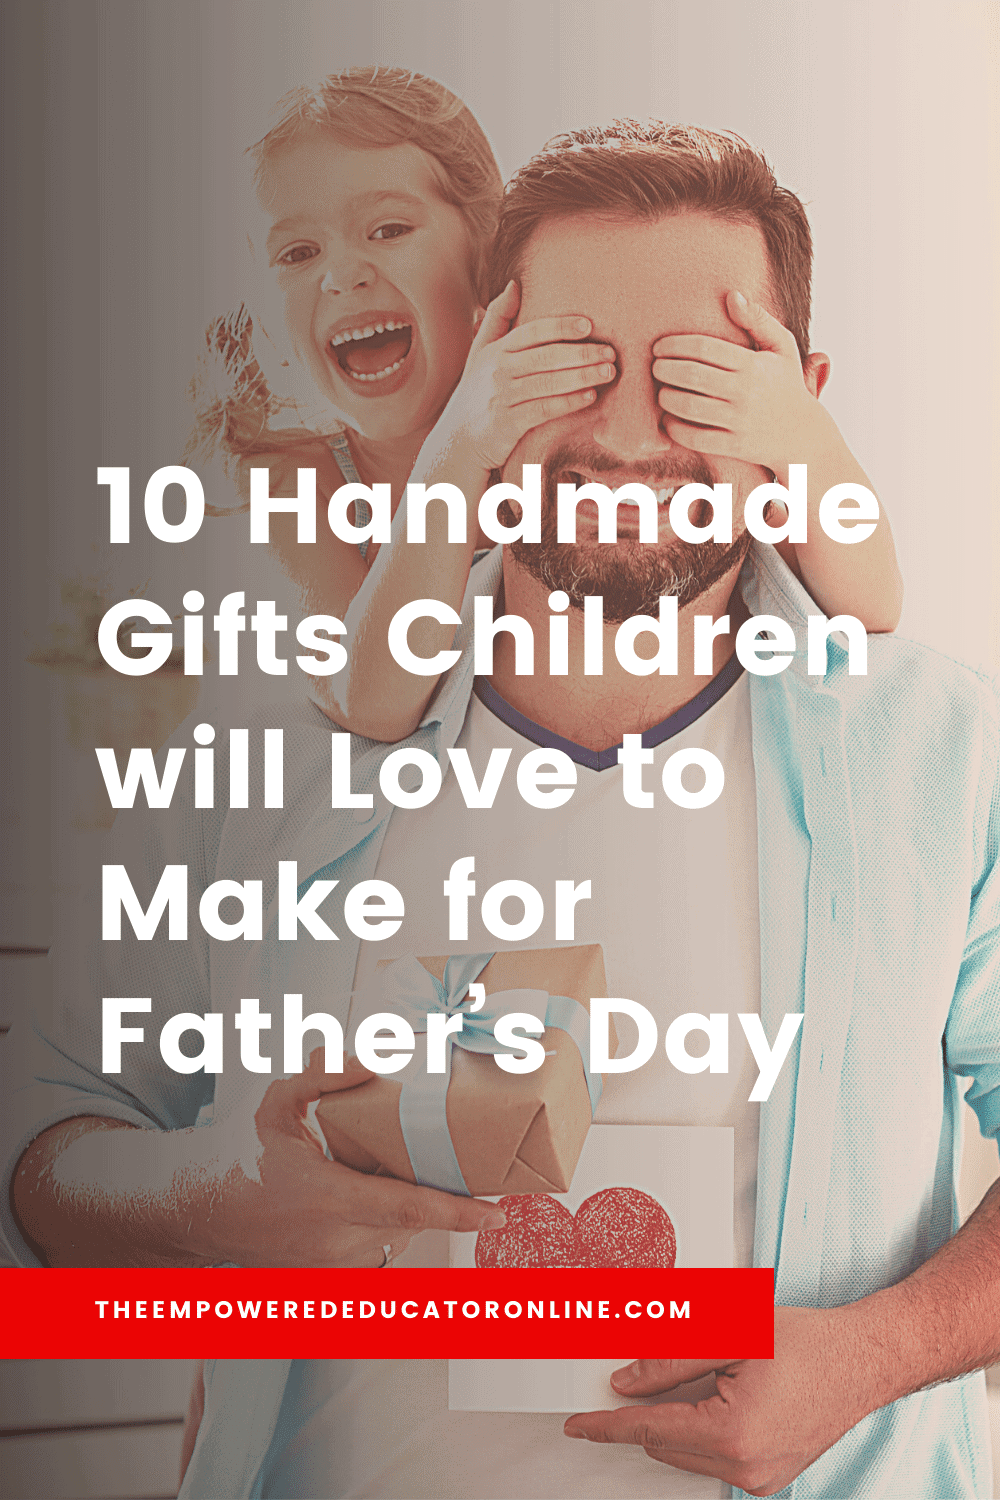 10 Handmade Gifts Children will Love to Make for Father’s Day